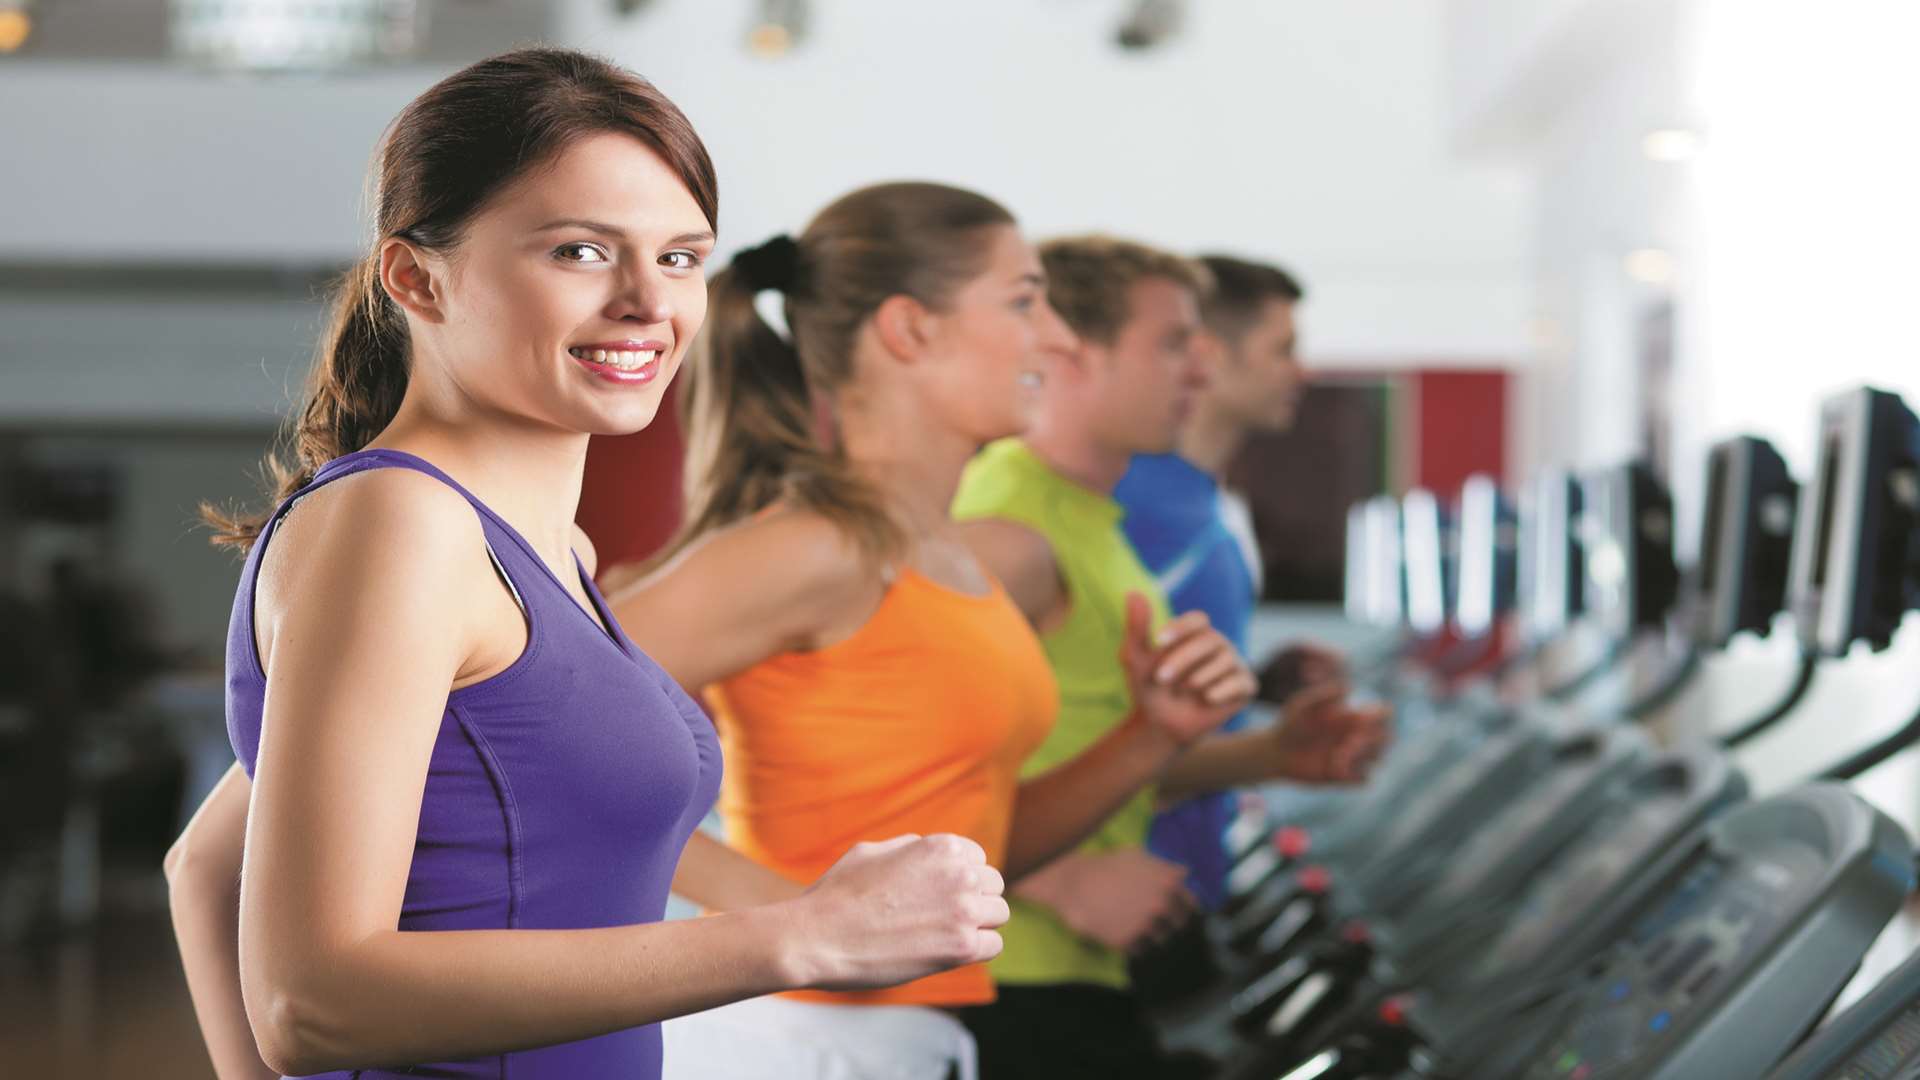 People in a gym on treadmill. Stock image